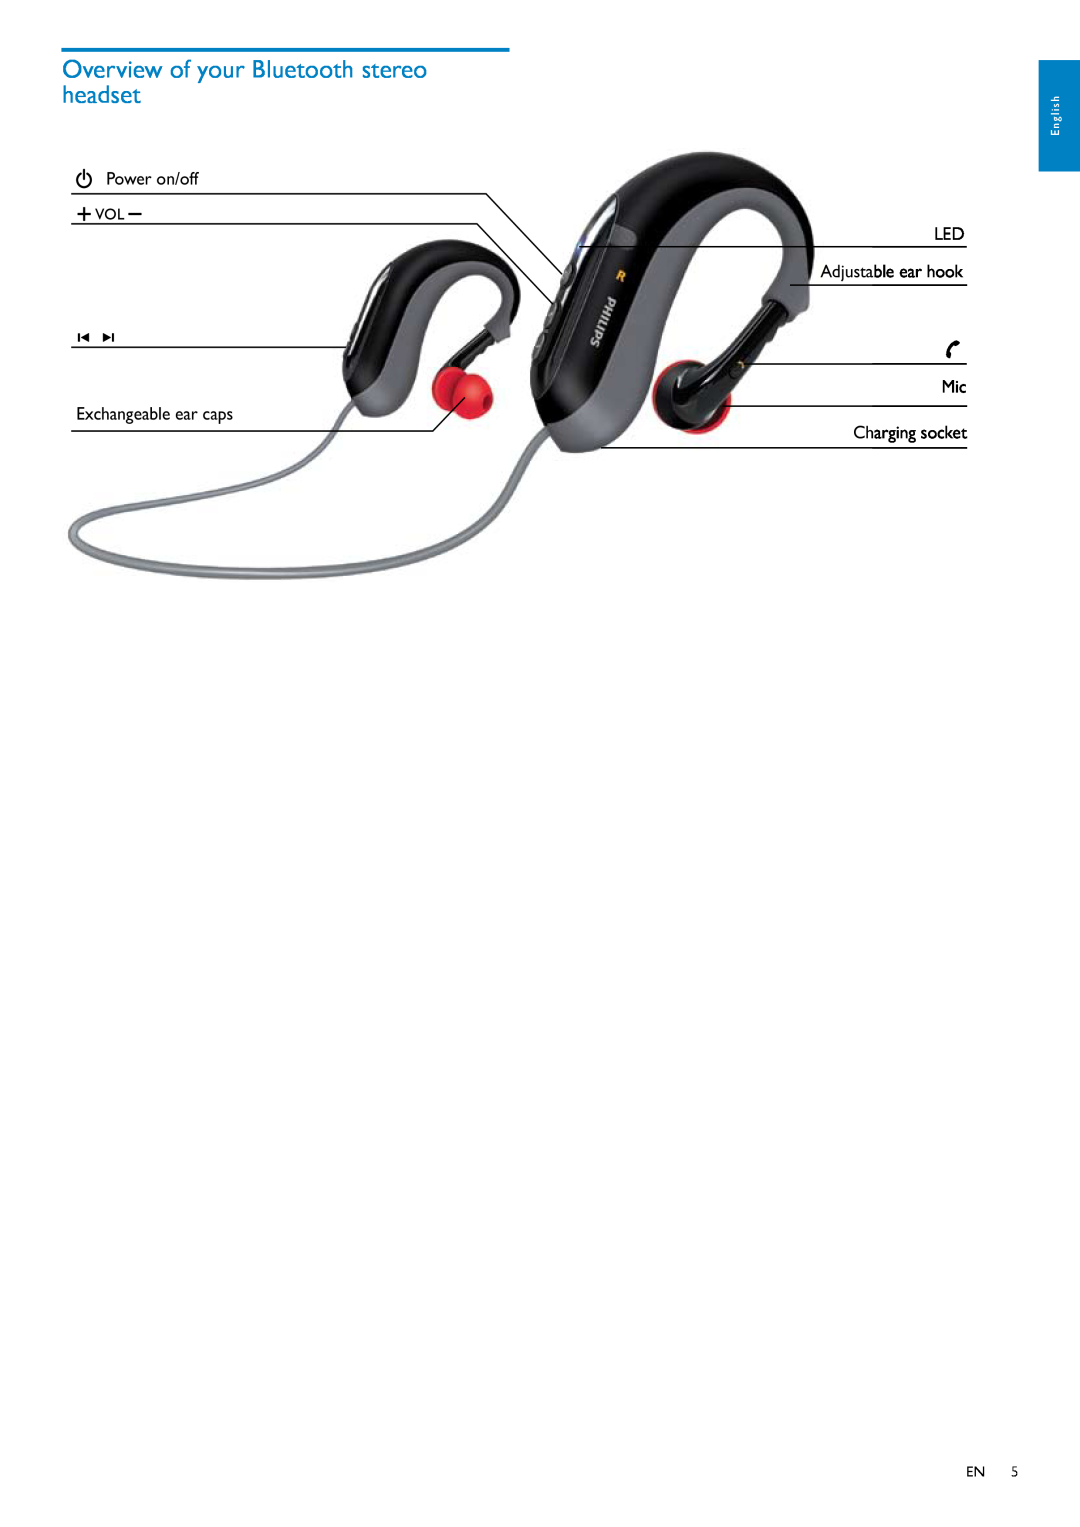 Philips SHB6017/10, SHB6017/28 Overview of your Bluetooth stereo headset, Power on/off Exchangeable ear caps, English 